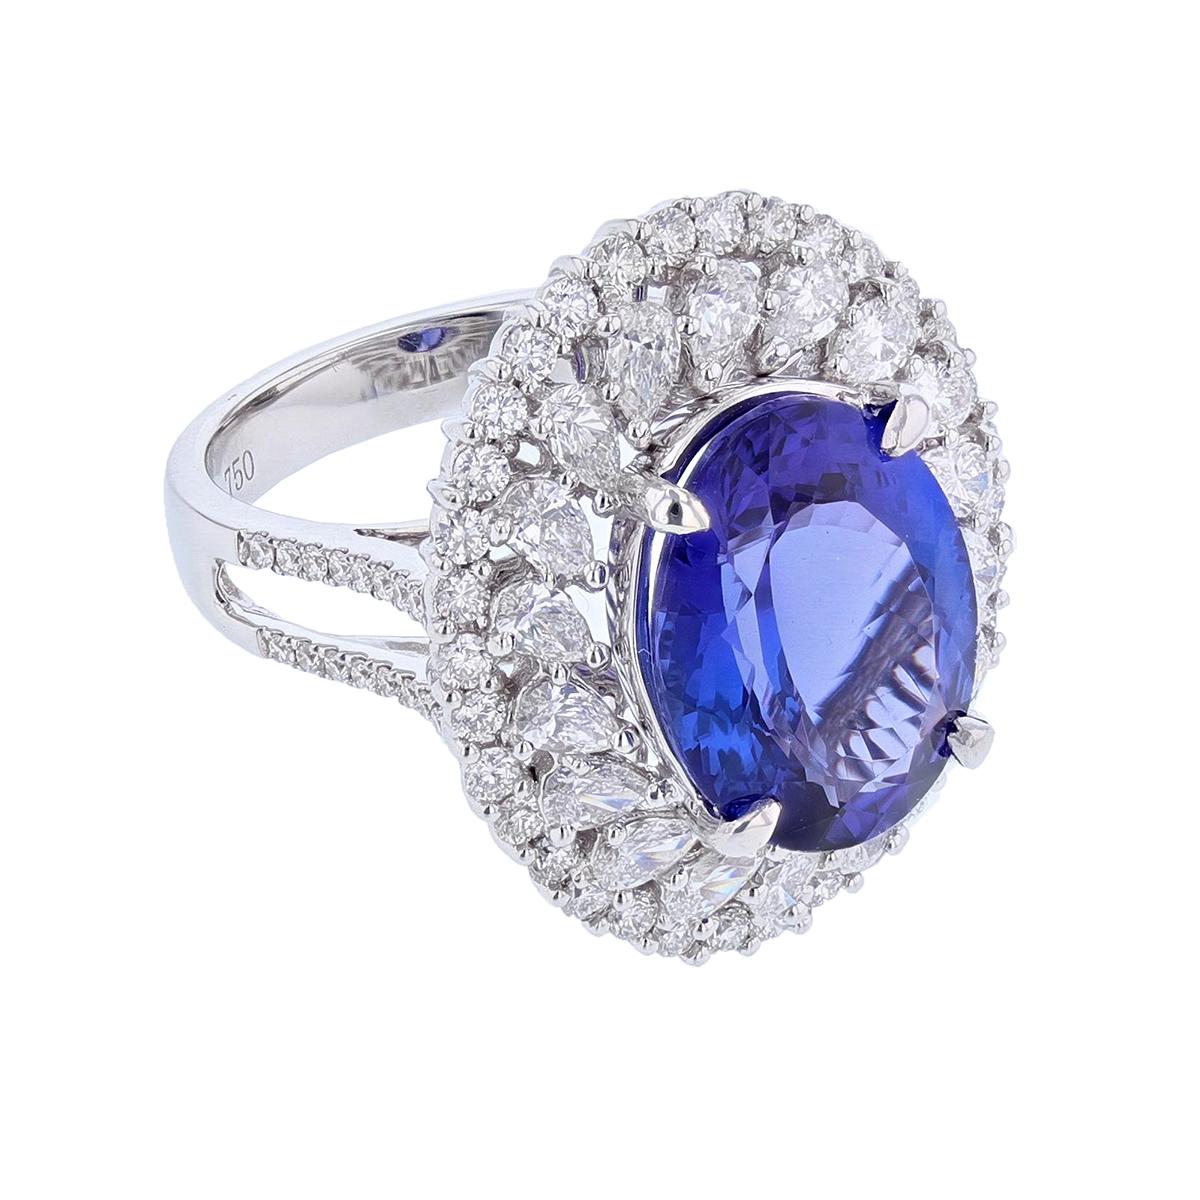 This ring is made in 18 karat white gold. The center stone is an oval cut tanzanite weighing 6.53 carats and is prong set. The mounting features 66 round cut, prong set diamonds weighing 0.96 carats and 18 pear shape, prong set diamonds weighing